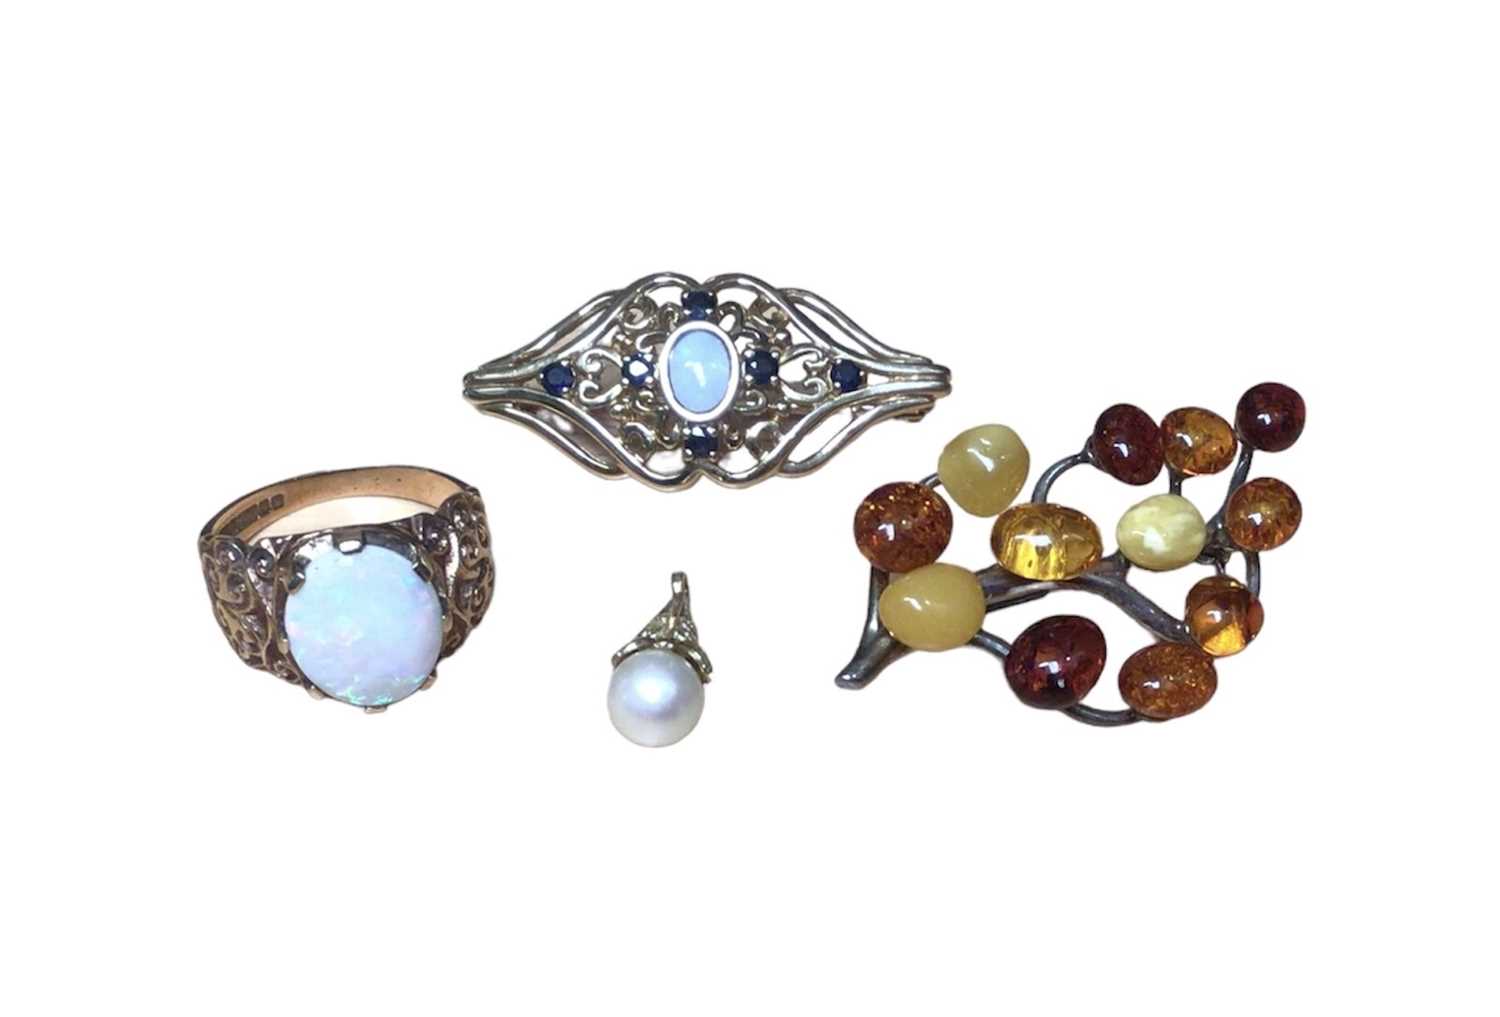 Lot 21 - 9ct gold opal ring, 9ct gold opal and blue sapphire brooch, 9ct gold mounted cultured pearl pedant